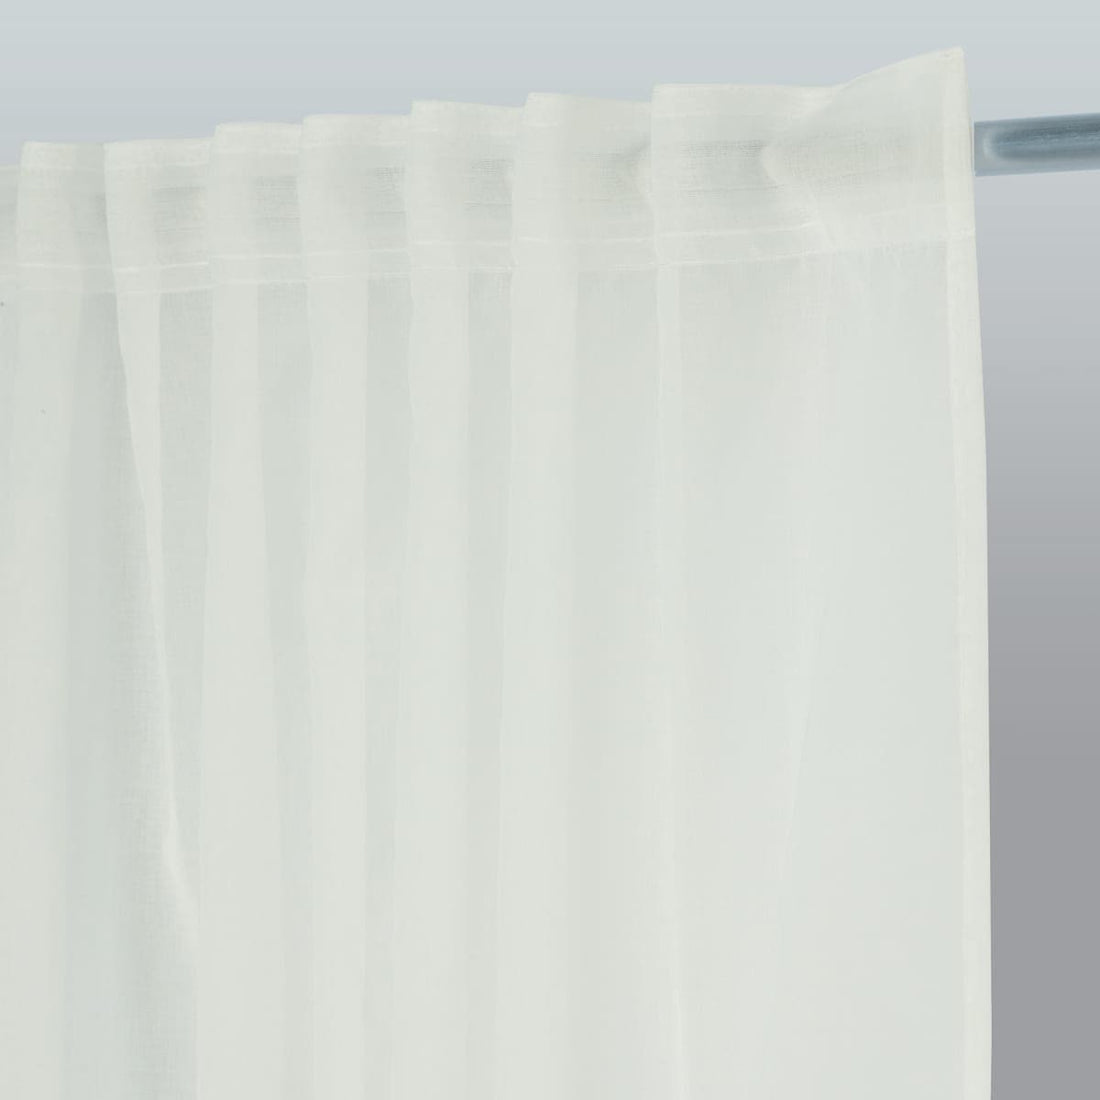 BRODE FLOR WHITE FILTER CURTAIN 140X280 CM WITH CONCEALED LOOP AND WEBBING - best price from Maltashopper.com BR480007411